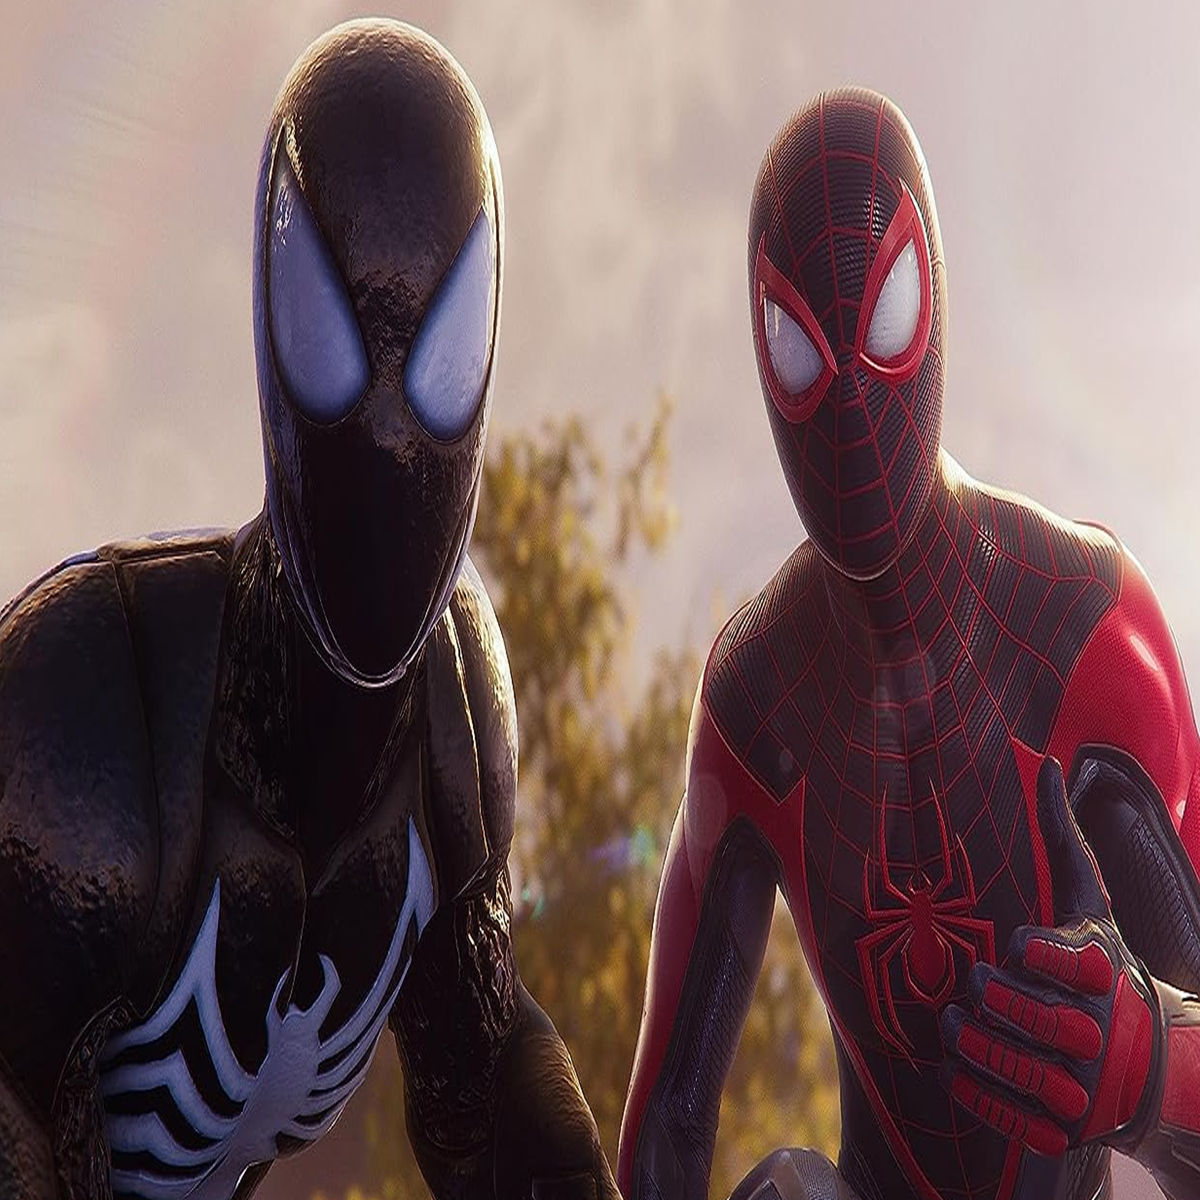 When Does 'Spider-Man 2' Come Out On PC?